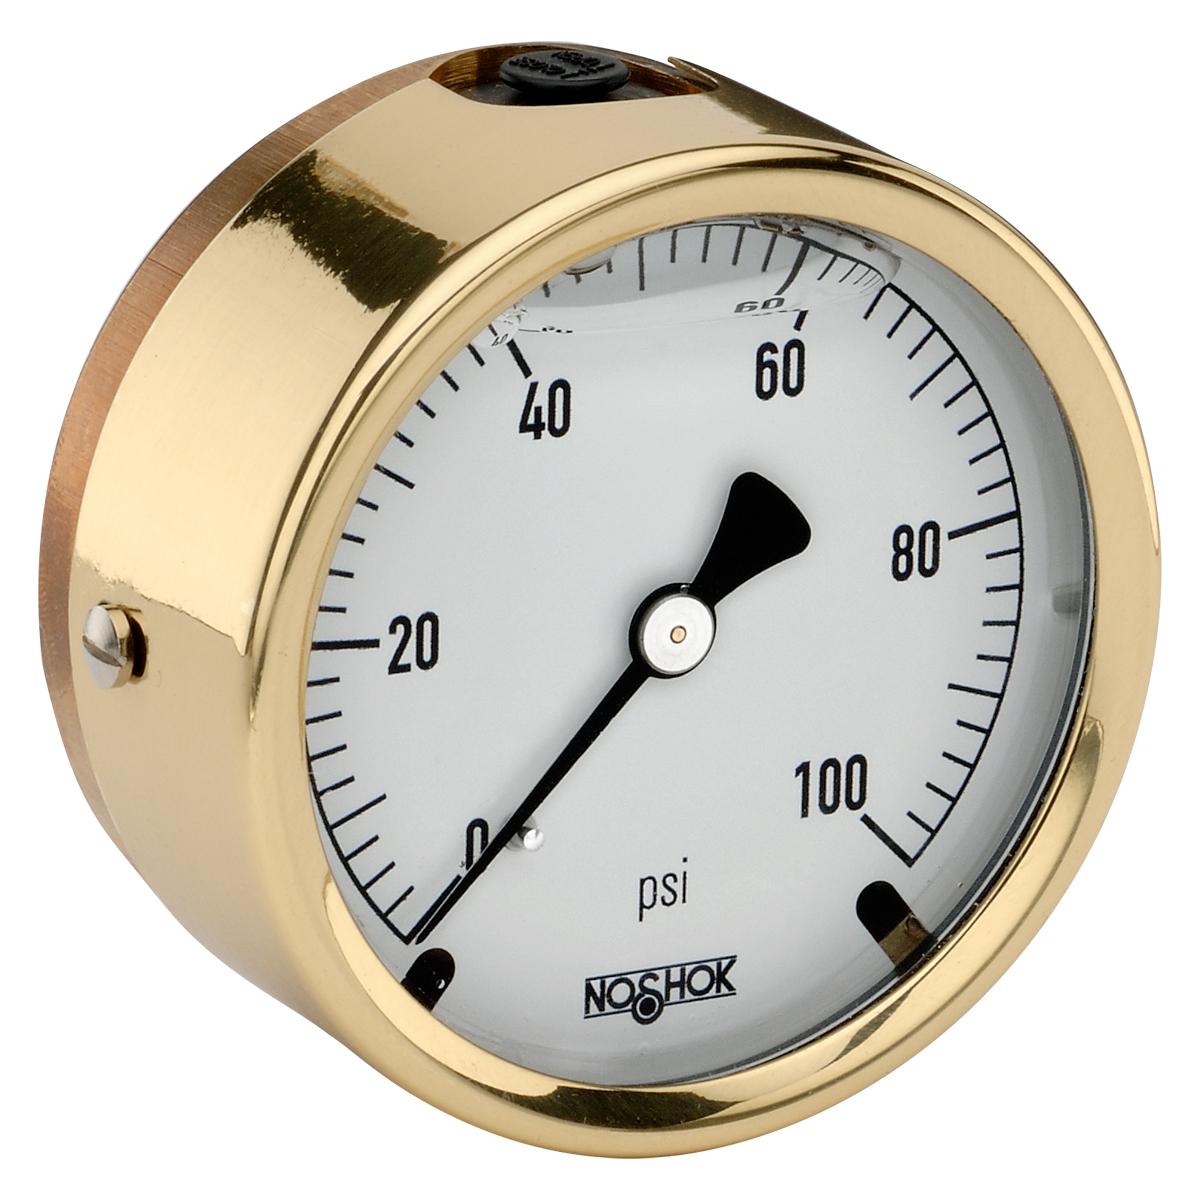 Noshok 25-310-3000-PSI 2-1/2'' Brass Case, Copper Alloy Internals, 3,000 psi, 1/4'' National Pipe Thread (NPT) Male Back Connection Pressure Gauge with Glycerin Filled